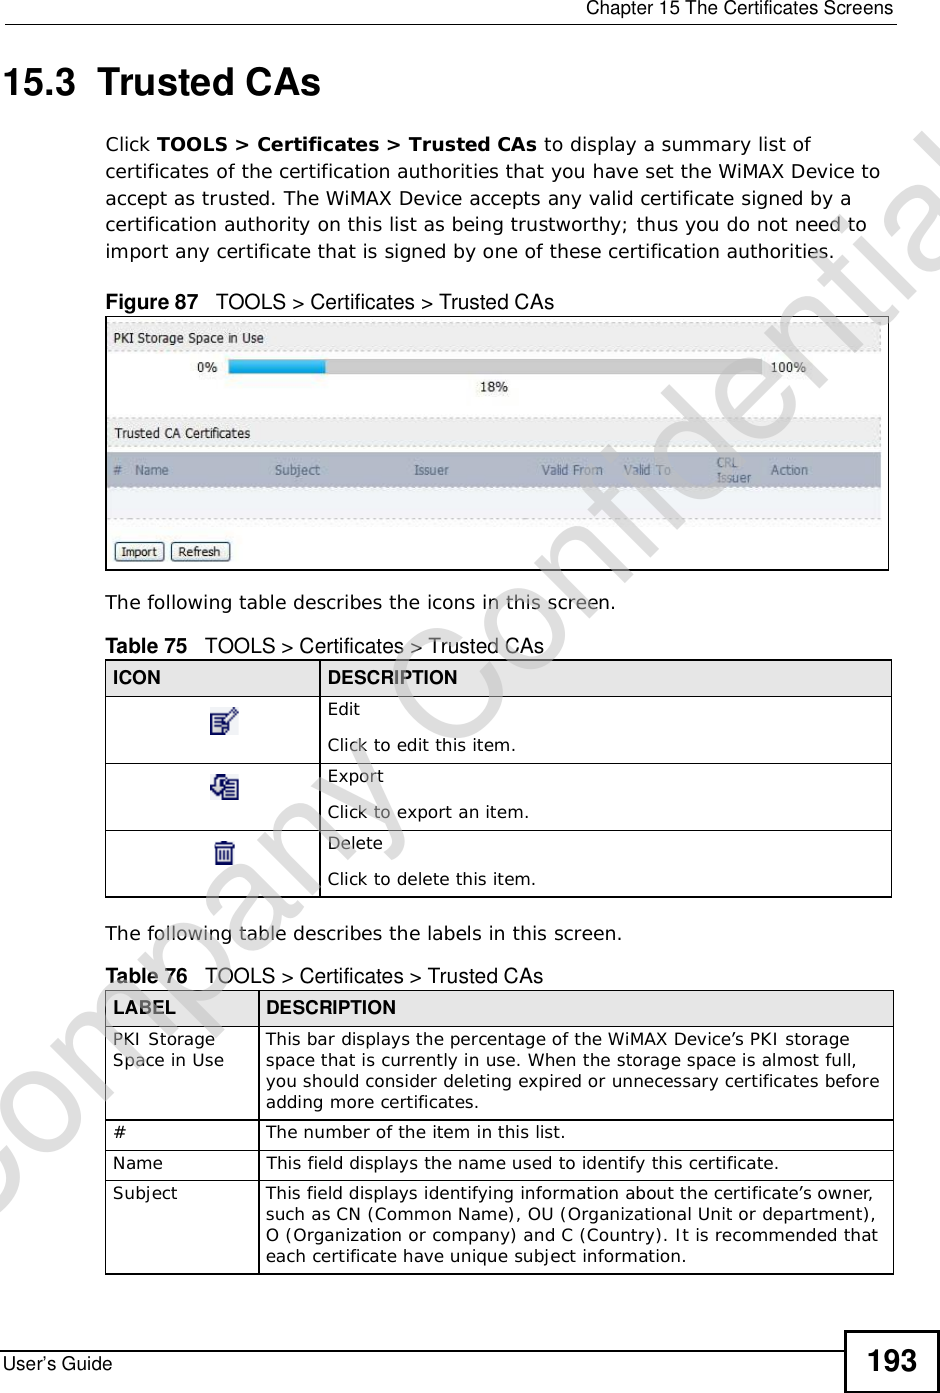  Chapter 15The Certificates ScreensUser’s Guide 19315.3  Trusted CAsClick TOOLS &gt; Certificates &gt;Trusted CAs to display a summary list of certificates of the certification authorities that you have set the WiMAX Device to accept as trusted. The WiMAX Device accepts any valid certificate signed by a certification authority on this list as being trustworthy; thus you do not need to import any certificate that is signed by one of these certification authorities. Figure 87   TOOLS &gt; Certificates &gt; Trusted CAsThe following table describes the icons in this screen.The following table describes the labels in this screen. Table 75   TOOLS &gt; Certificates &gt; Trusted CAsICON DESCRIPTIONEditClick to edit this item.ExportClick to export an item.DeleteClick to delete this item.Table 76   TOOLS &gt; Certificates &gt; Trusted CAsLABEL DESCRIPTIONPKI Storage Space in Use This bar displays the percentage of the WiMAX Device’s PKI storage space that is currently in use. When the storage space is almost full, you should consider deleting expired or unnecessary certificates before adding more certificates.#The number of the item in this list.NameThis field displays the name used to identify this certificate. SubjectThis field displays identifying information about the certificate’s owner, such as CN (Common Name), OU (Organizational Unit or department), O (Organization or company) and C (Country). It is recommended that each certificate have unique subject information.Company Confidential